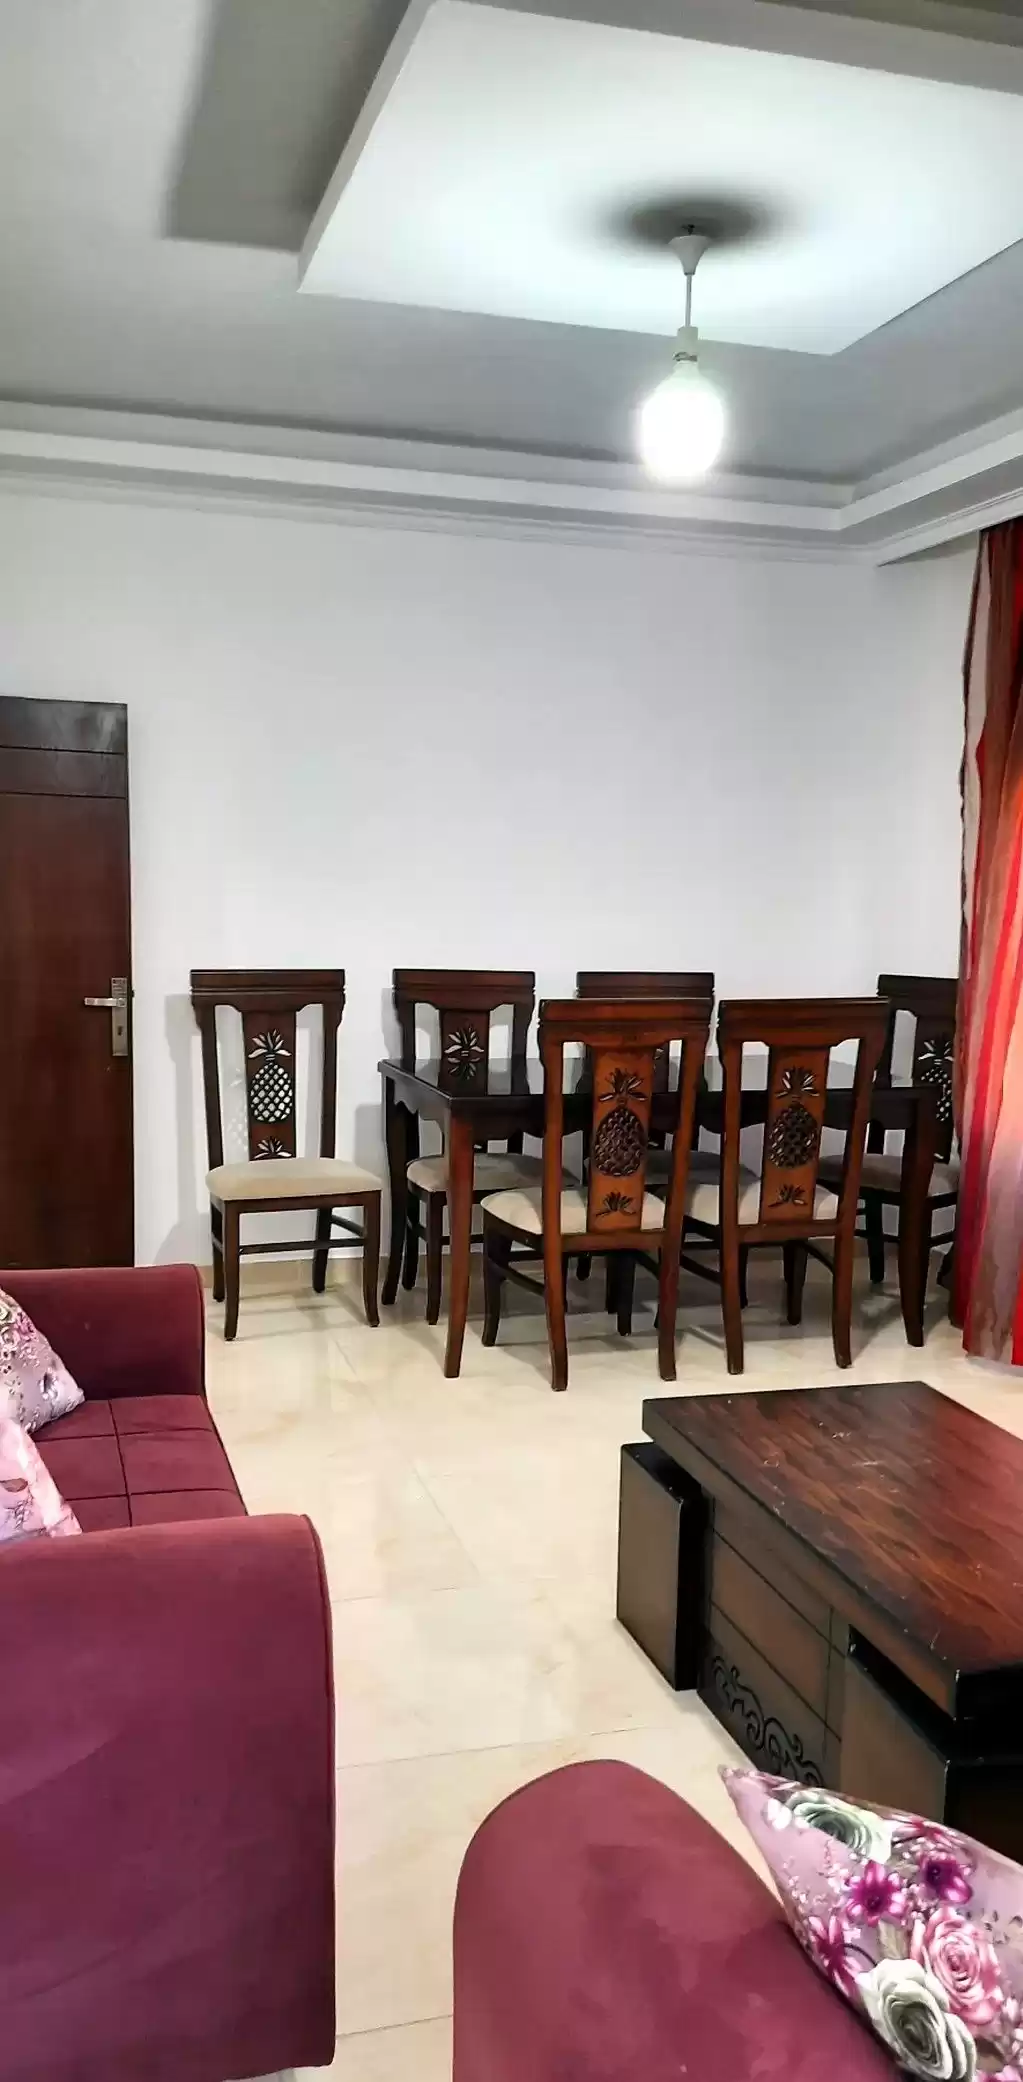 Residential Ready Property 3 Bedrooms F/F Apartment  for rent in Amman #26353 - 1  image 